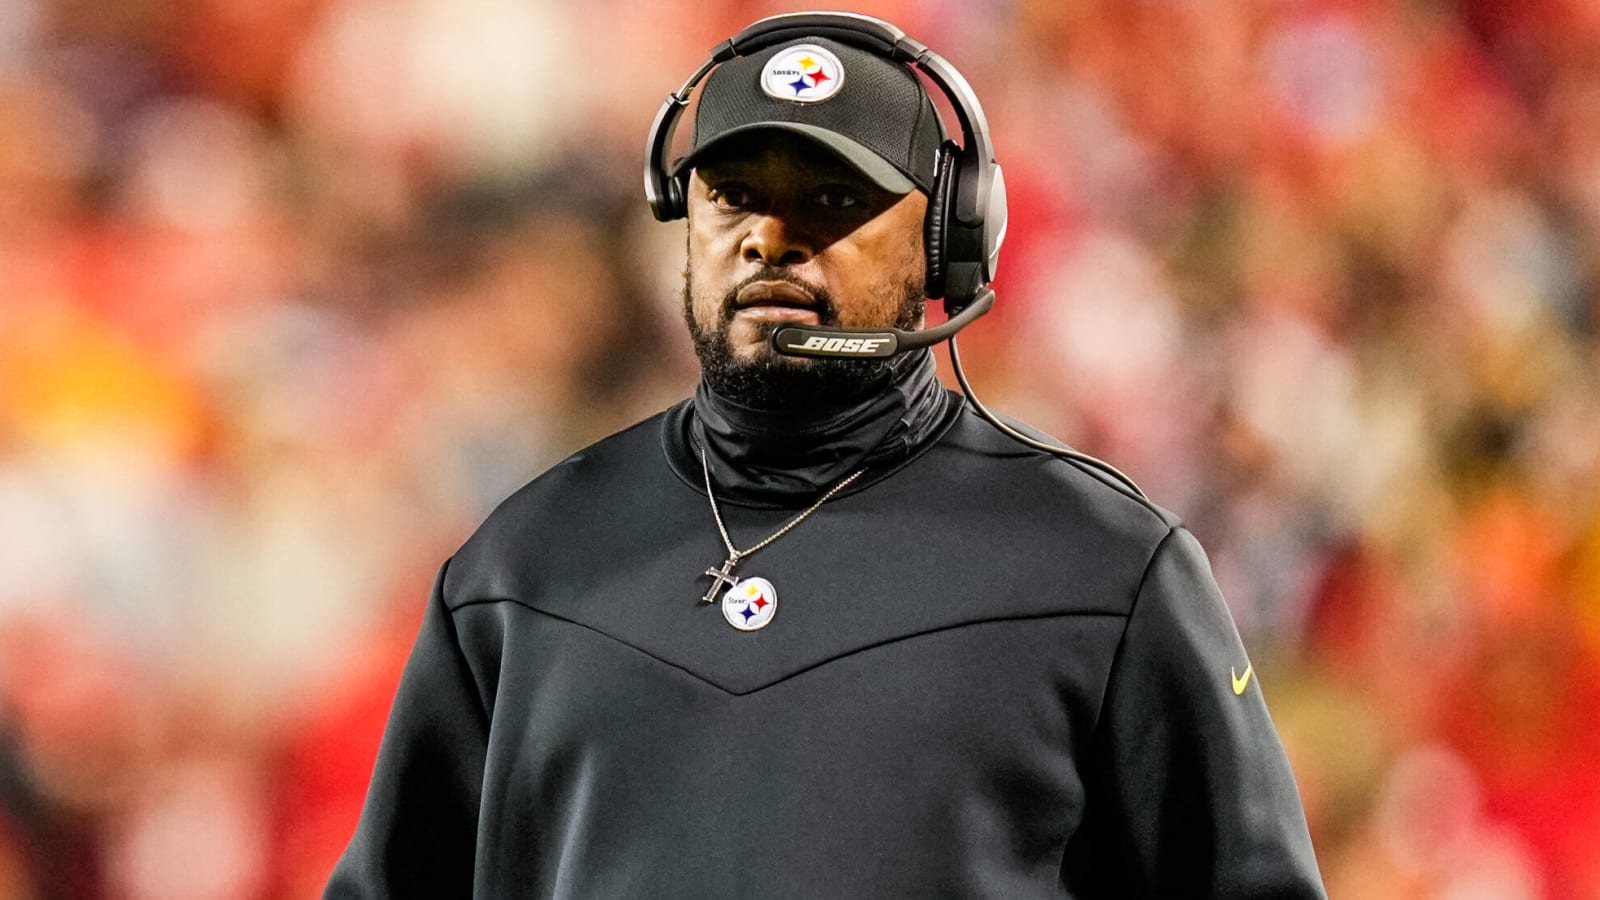 Mike Tomlin not in favor of changing NFL OT rules